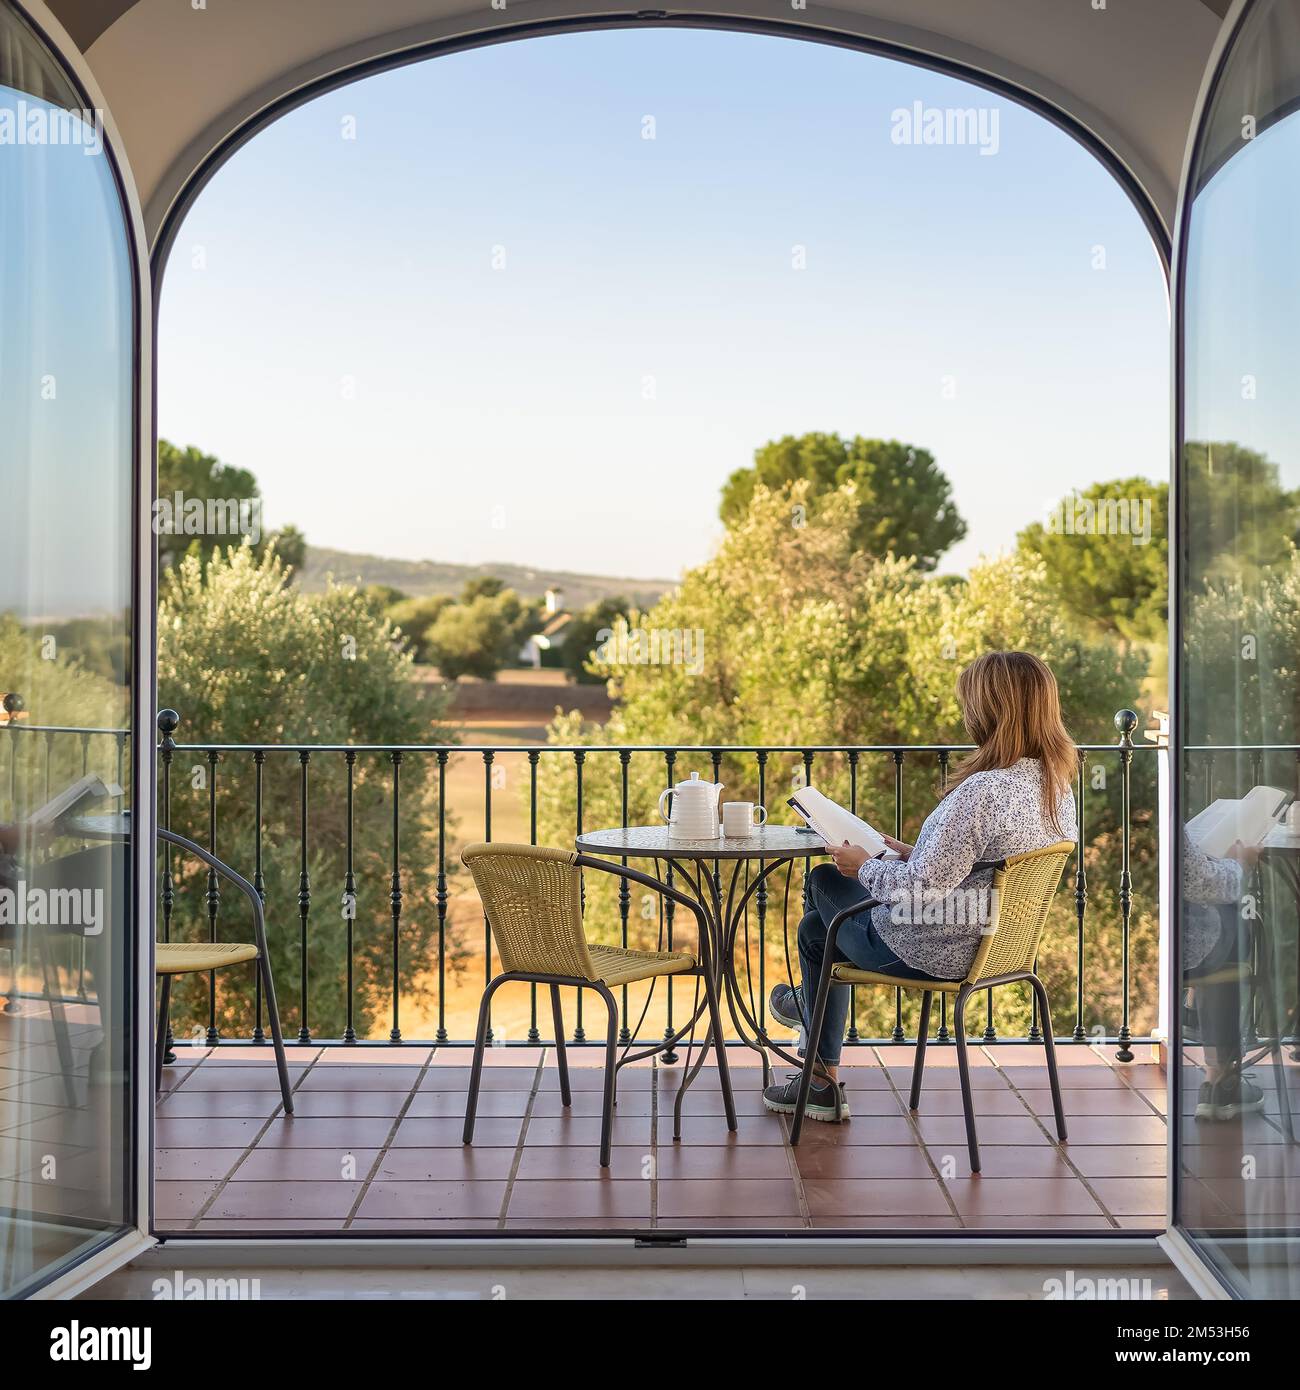 Woman reading a book on the terrace of her room with large glass doors and views to the outside of a large garden. Stock Photo